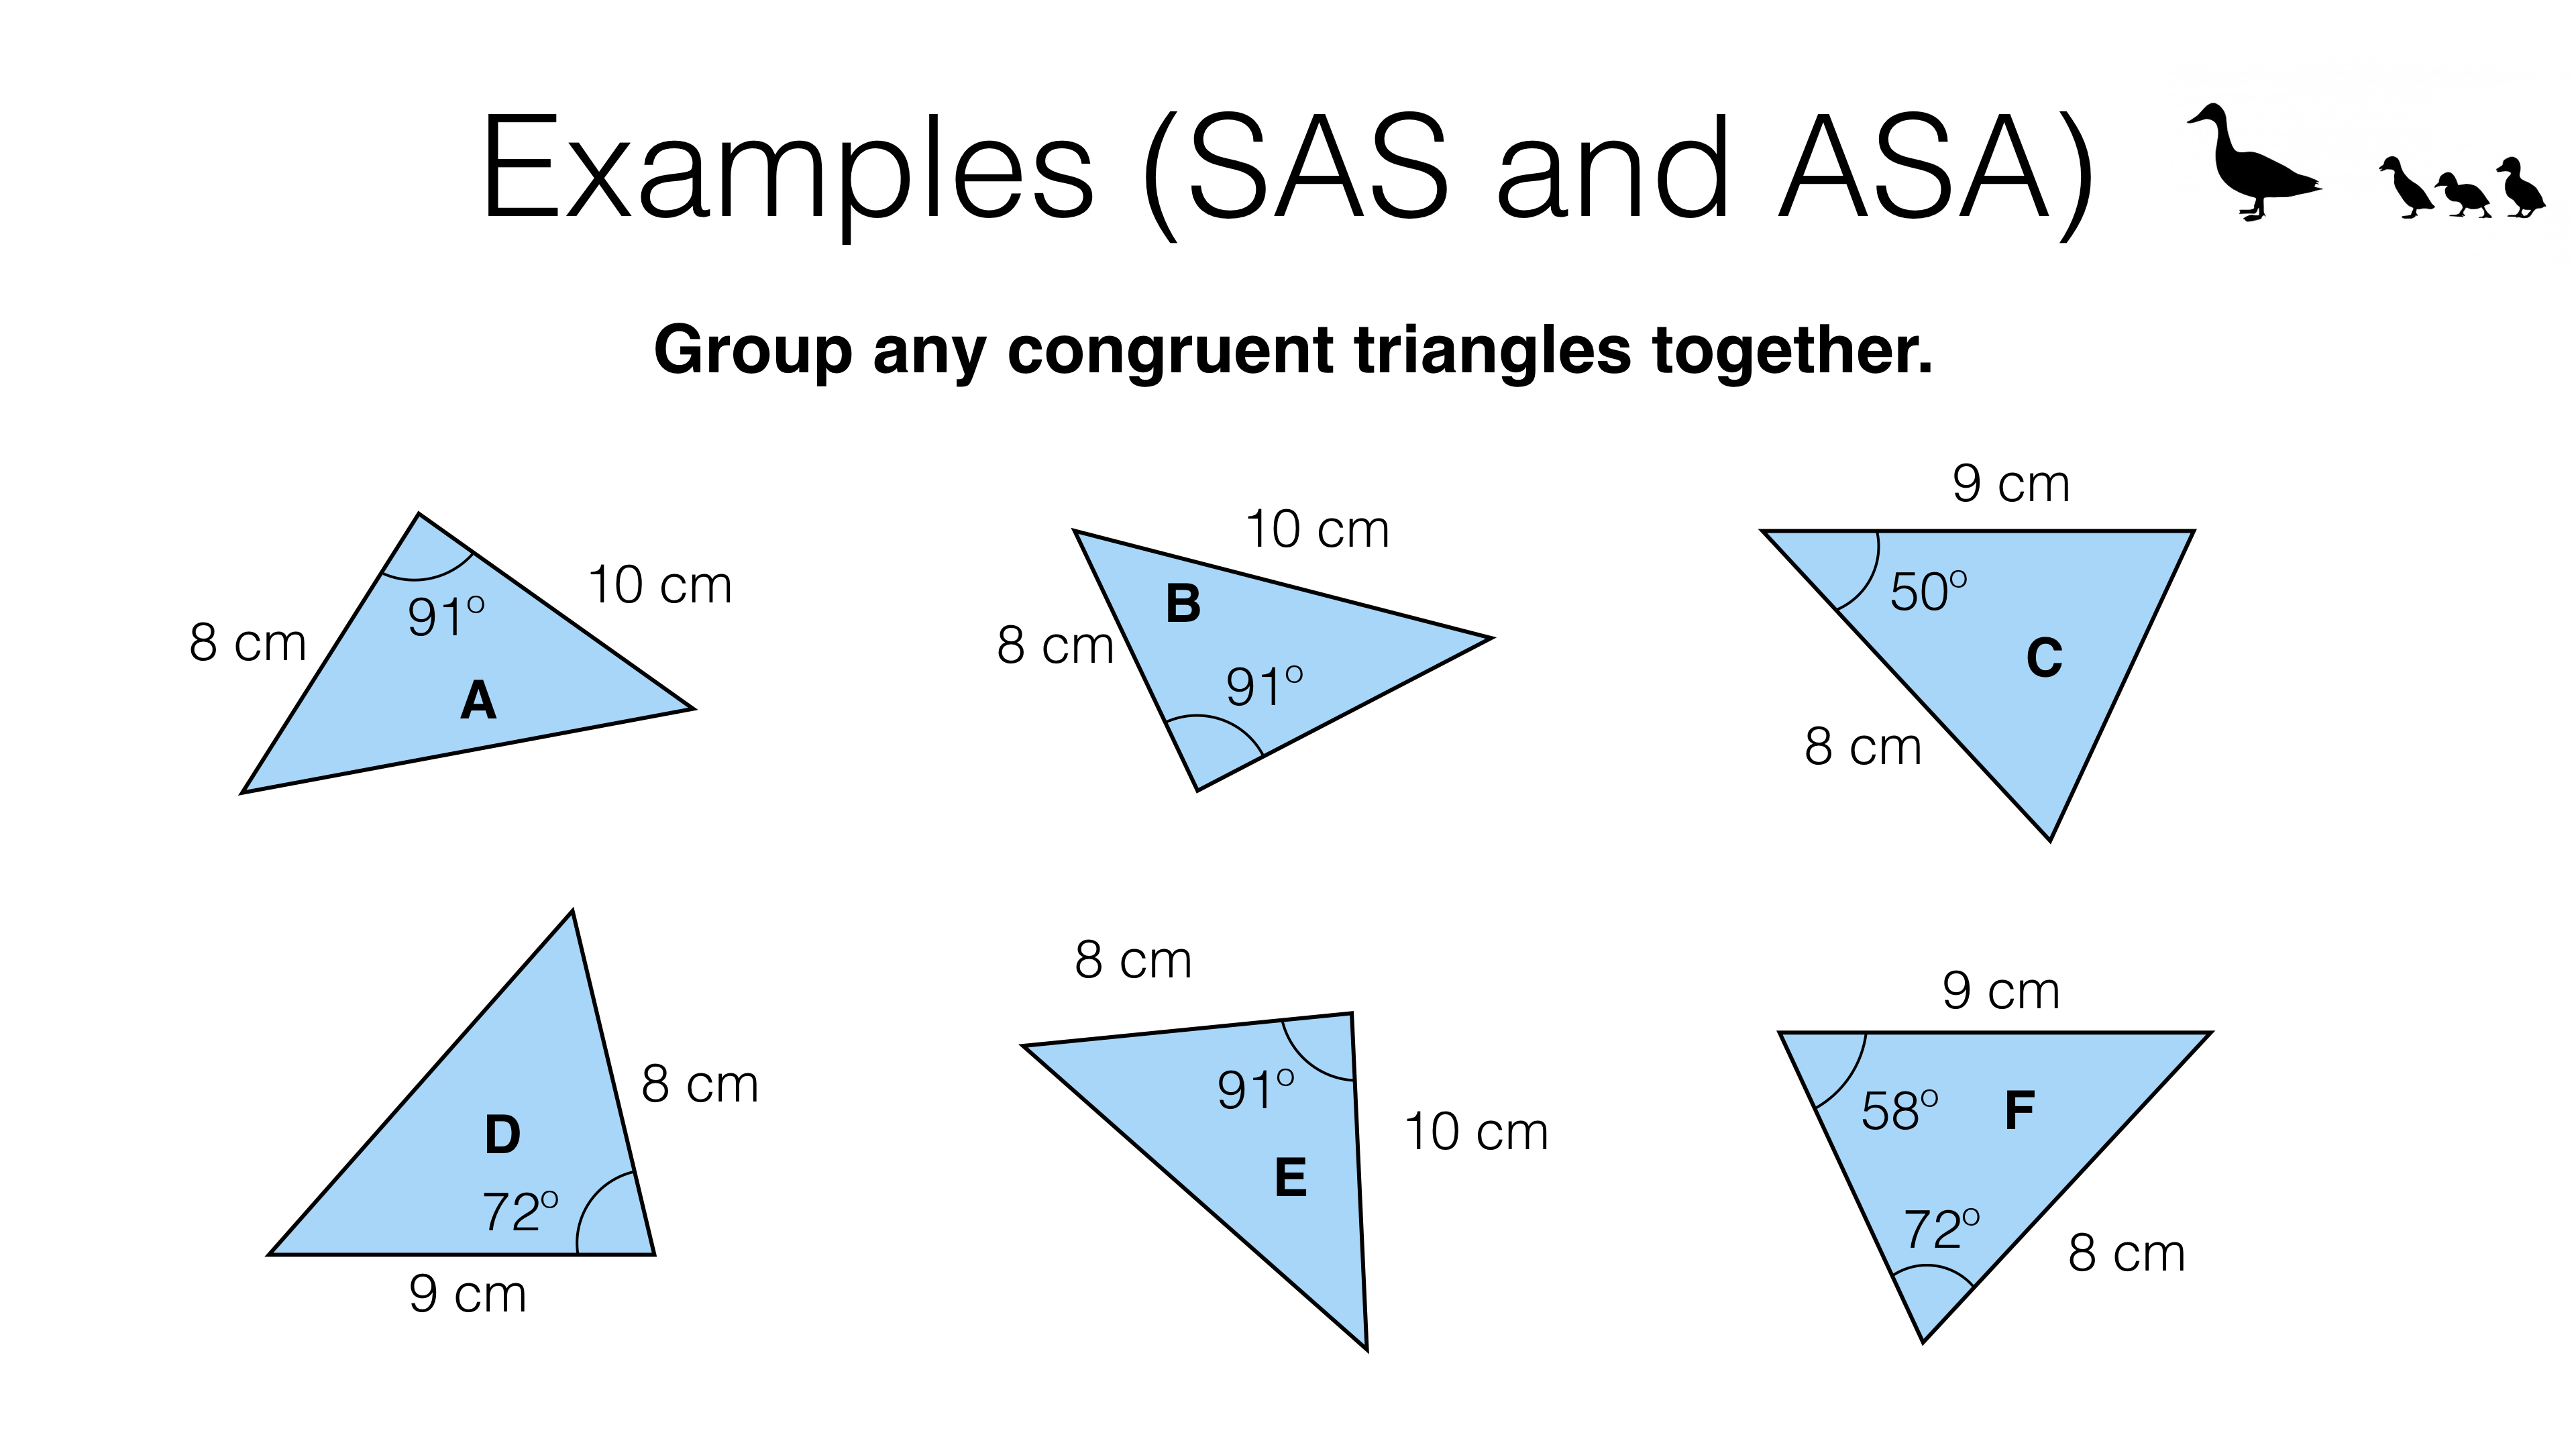 G25a – Congruence criteria for triangles (SSS, SAS, ASA, RHS Intended For Proving Triangles Congruent Worksheet Answers